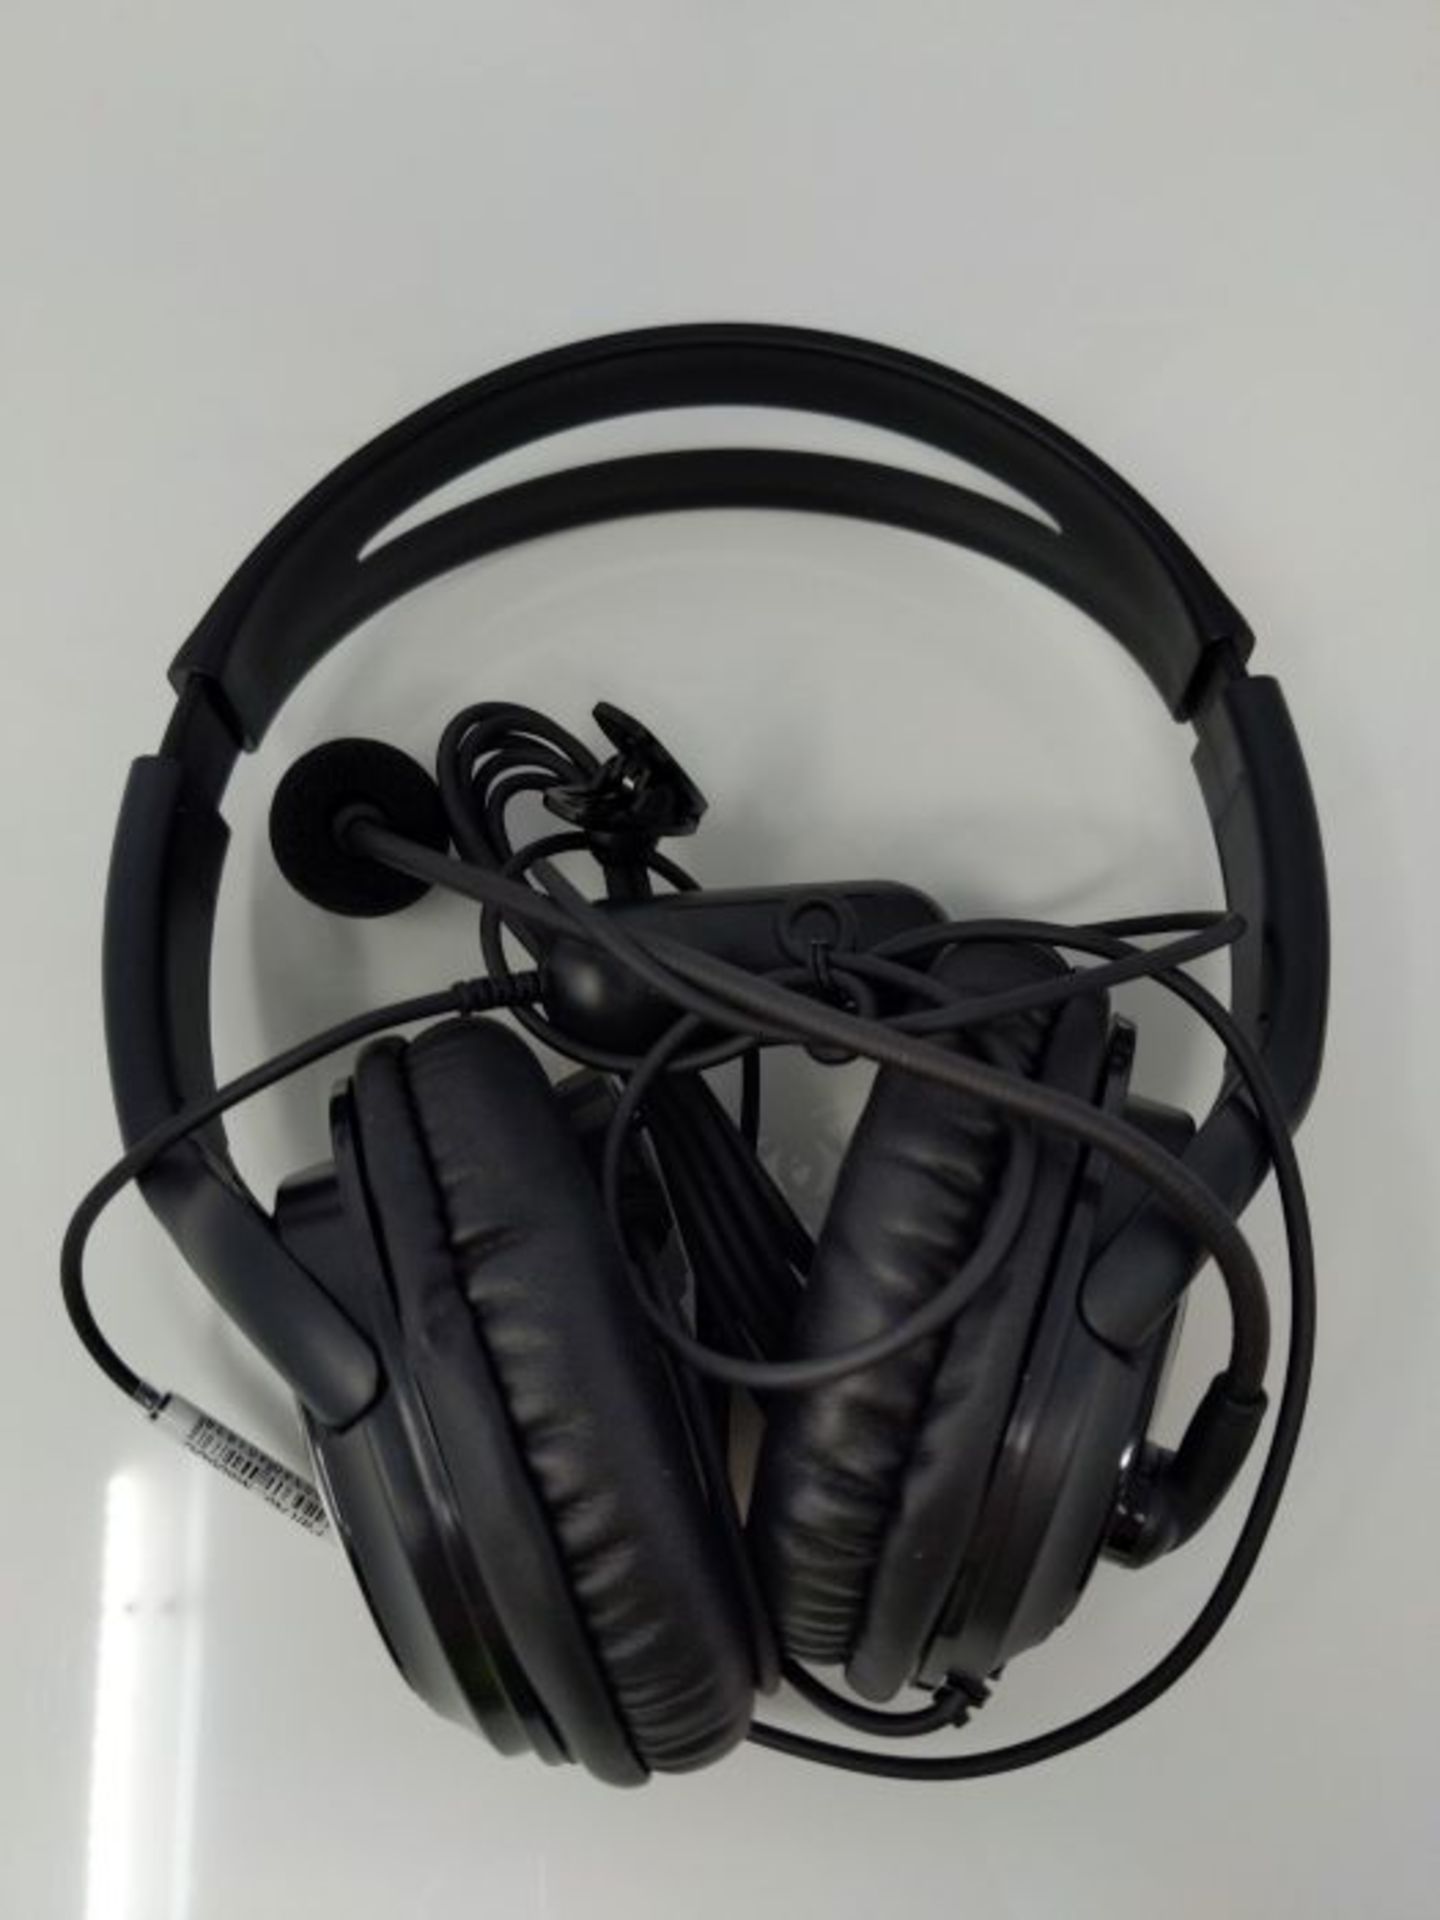 USB Headset with Noise Cancelling Microphone for Office Call Center Skype Teams Busine - Image 2 of 2